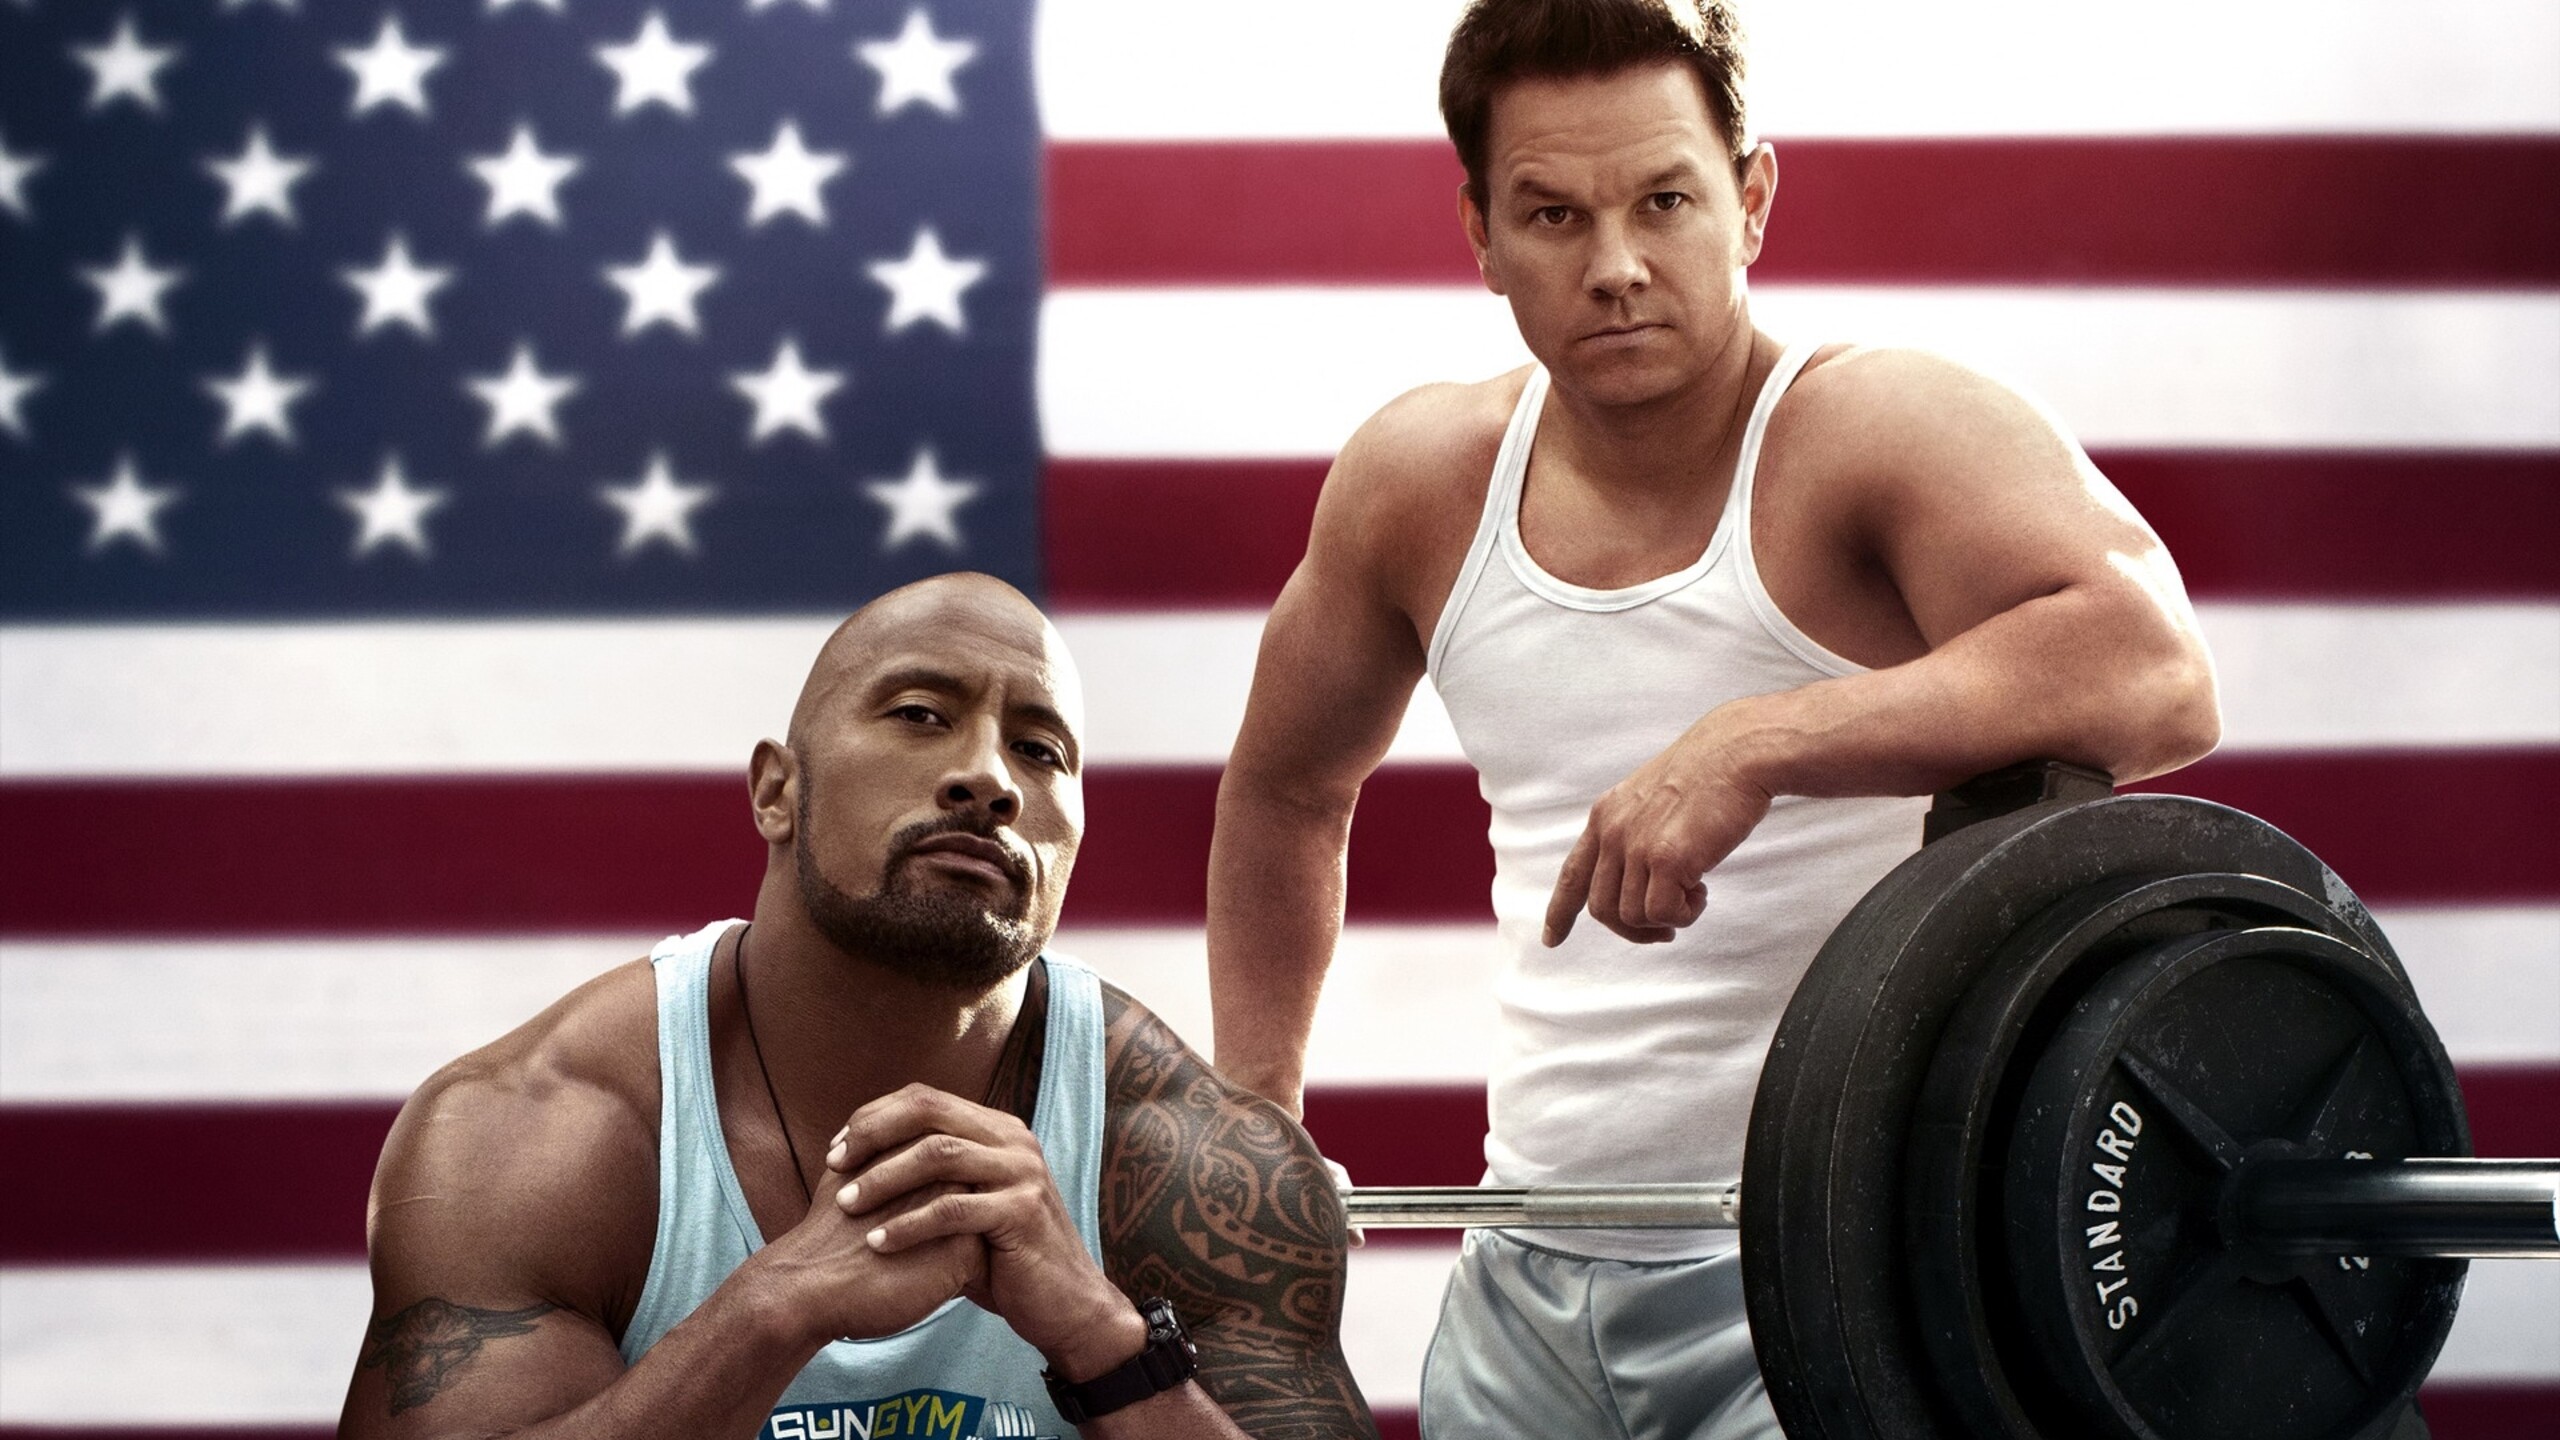 Powerlifting: Weight lifting, Physical exercises and sports in which people lift weights. 2560x1440 HD Background.